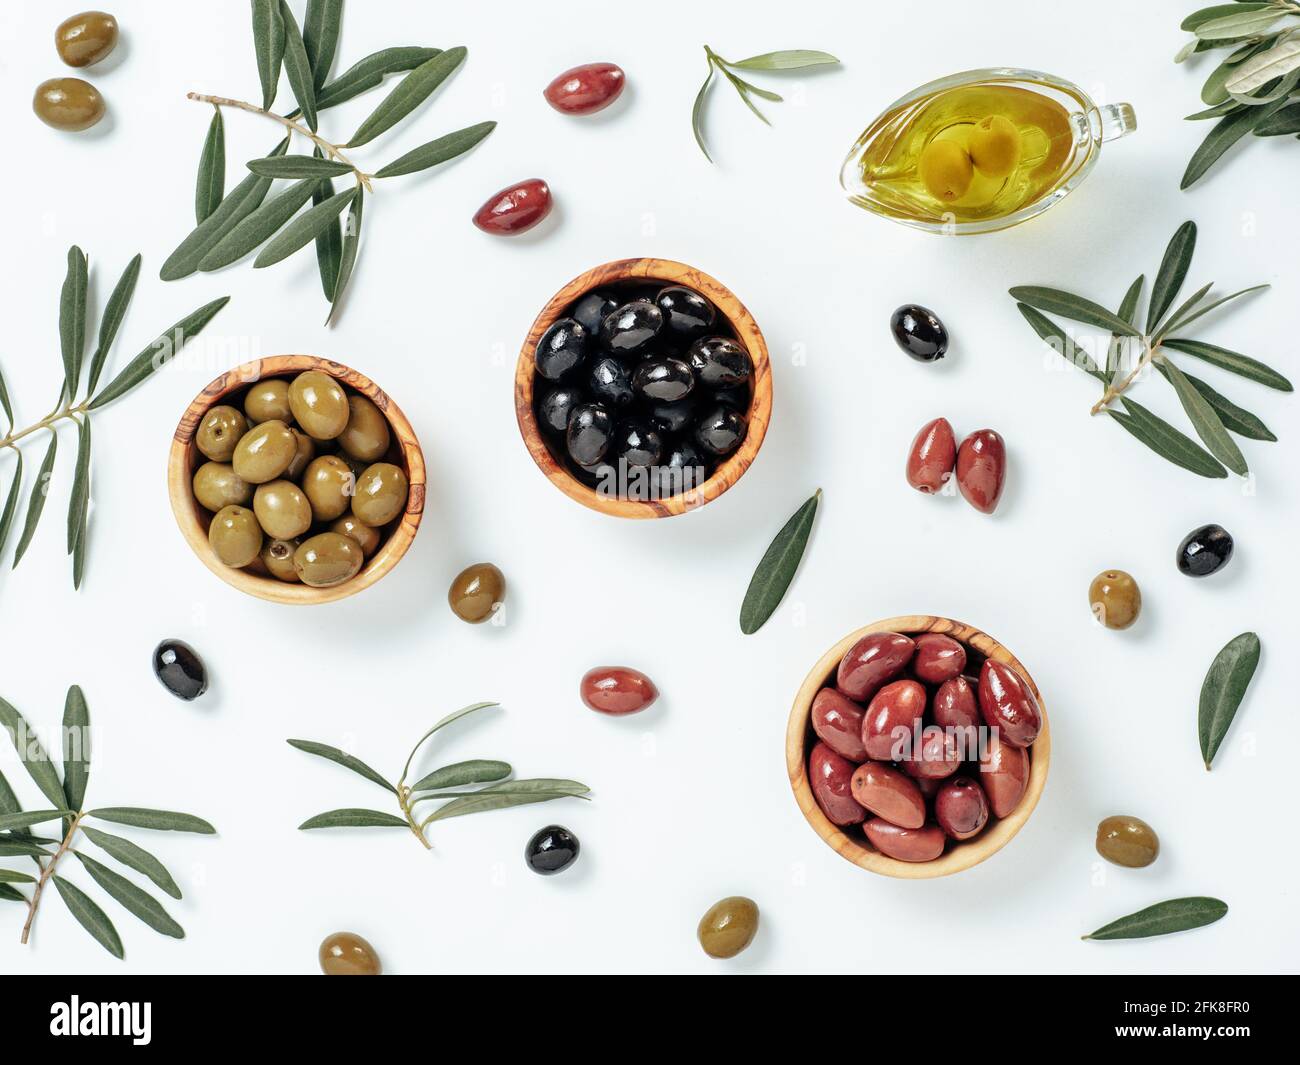 Set of green olives, black olives and red kalmata olives and extra virgin olive oil on white background. Top view of different types of olives in bowls and oil on leaves and branches background. Stock Photo